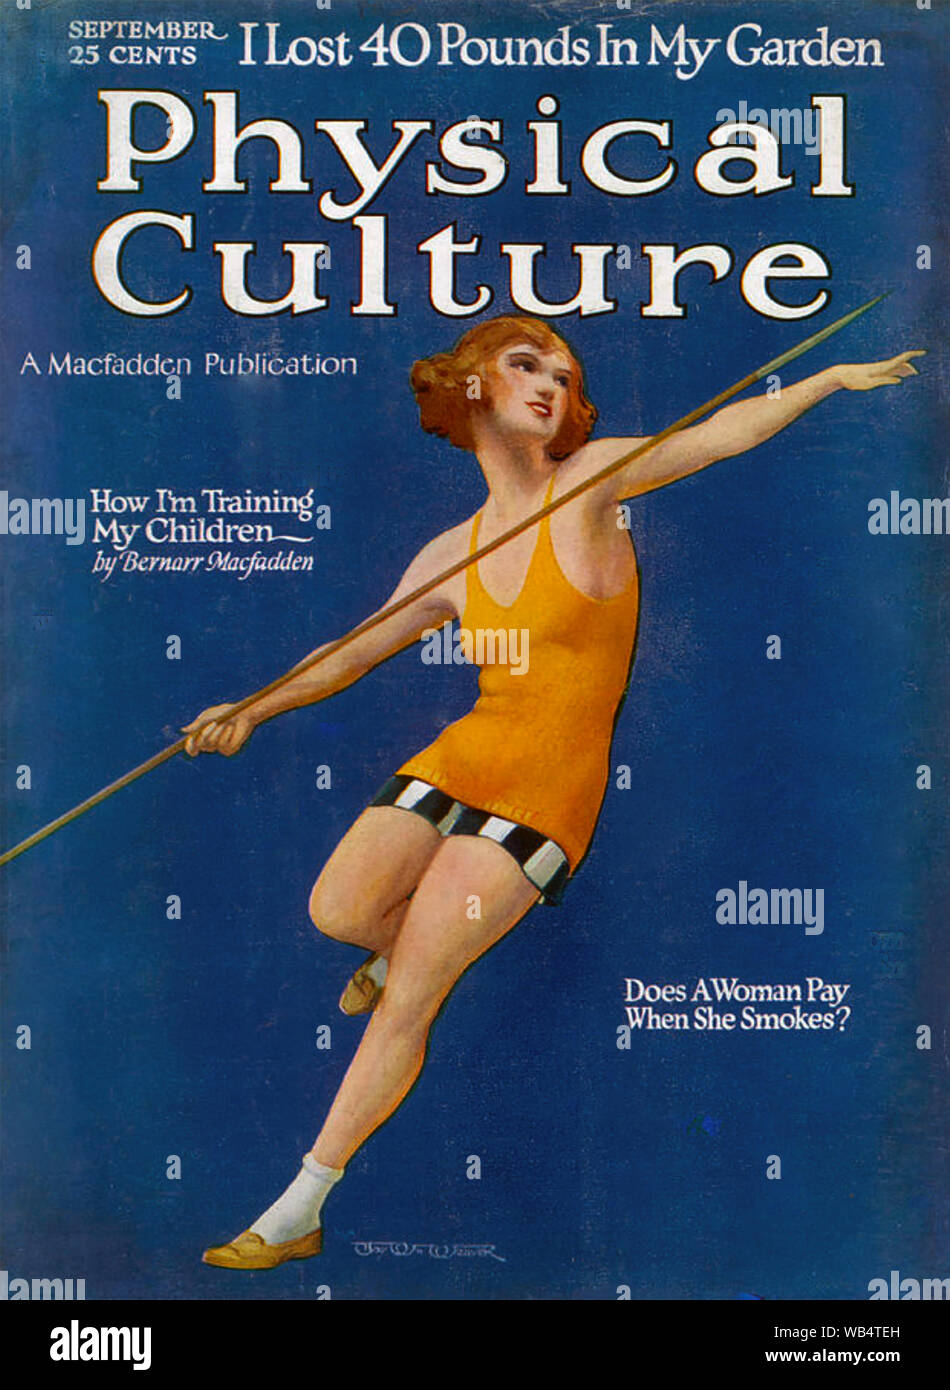 BERNARR MACFADDEN (1868-1955) American proponent of physical culture who founded several magazines including this one from 1922 which includes his article on bringing up children Stock Photo